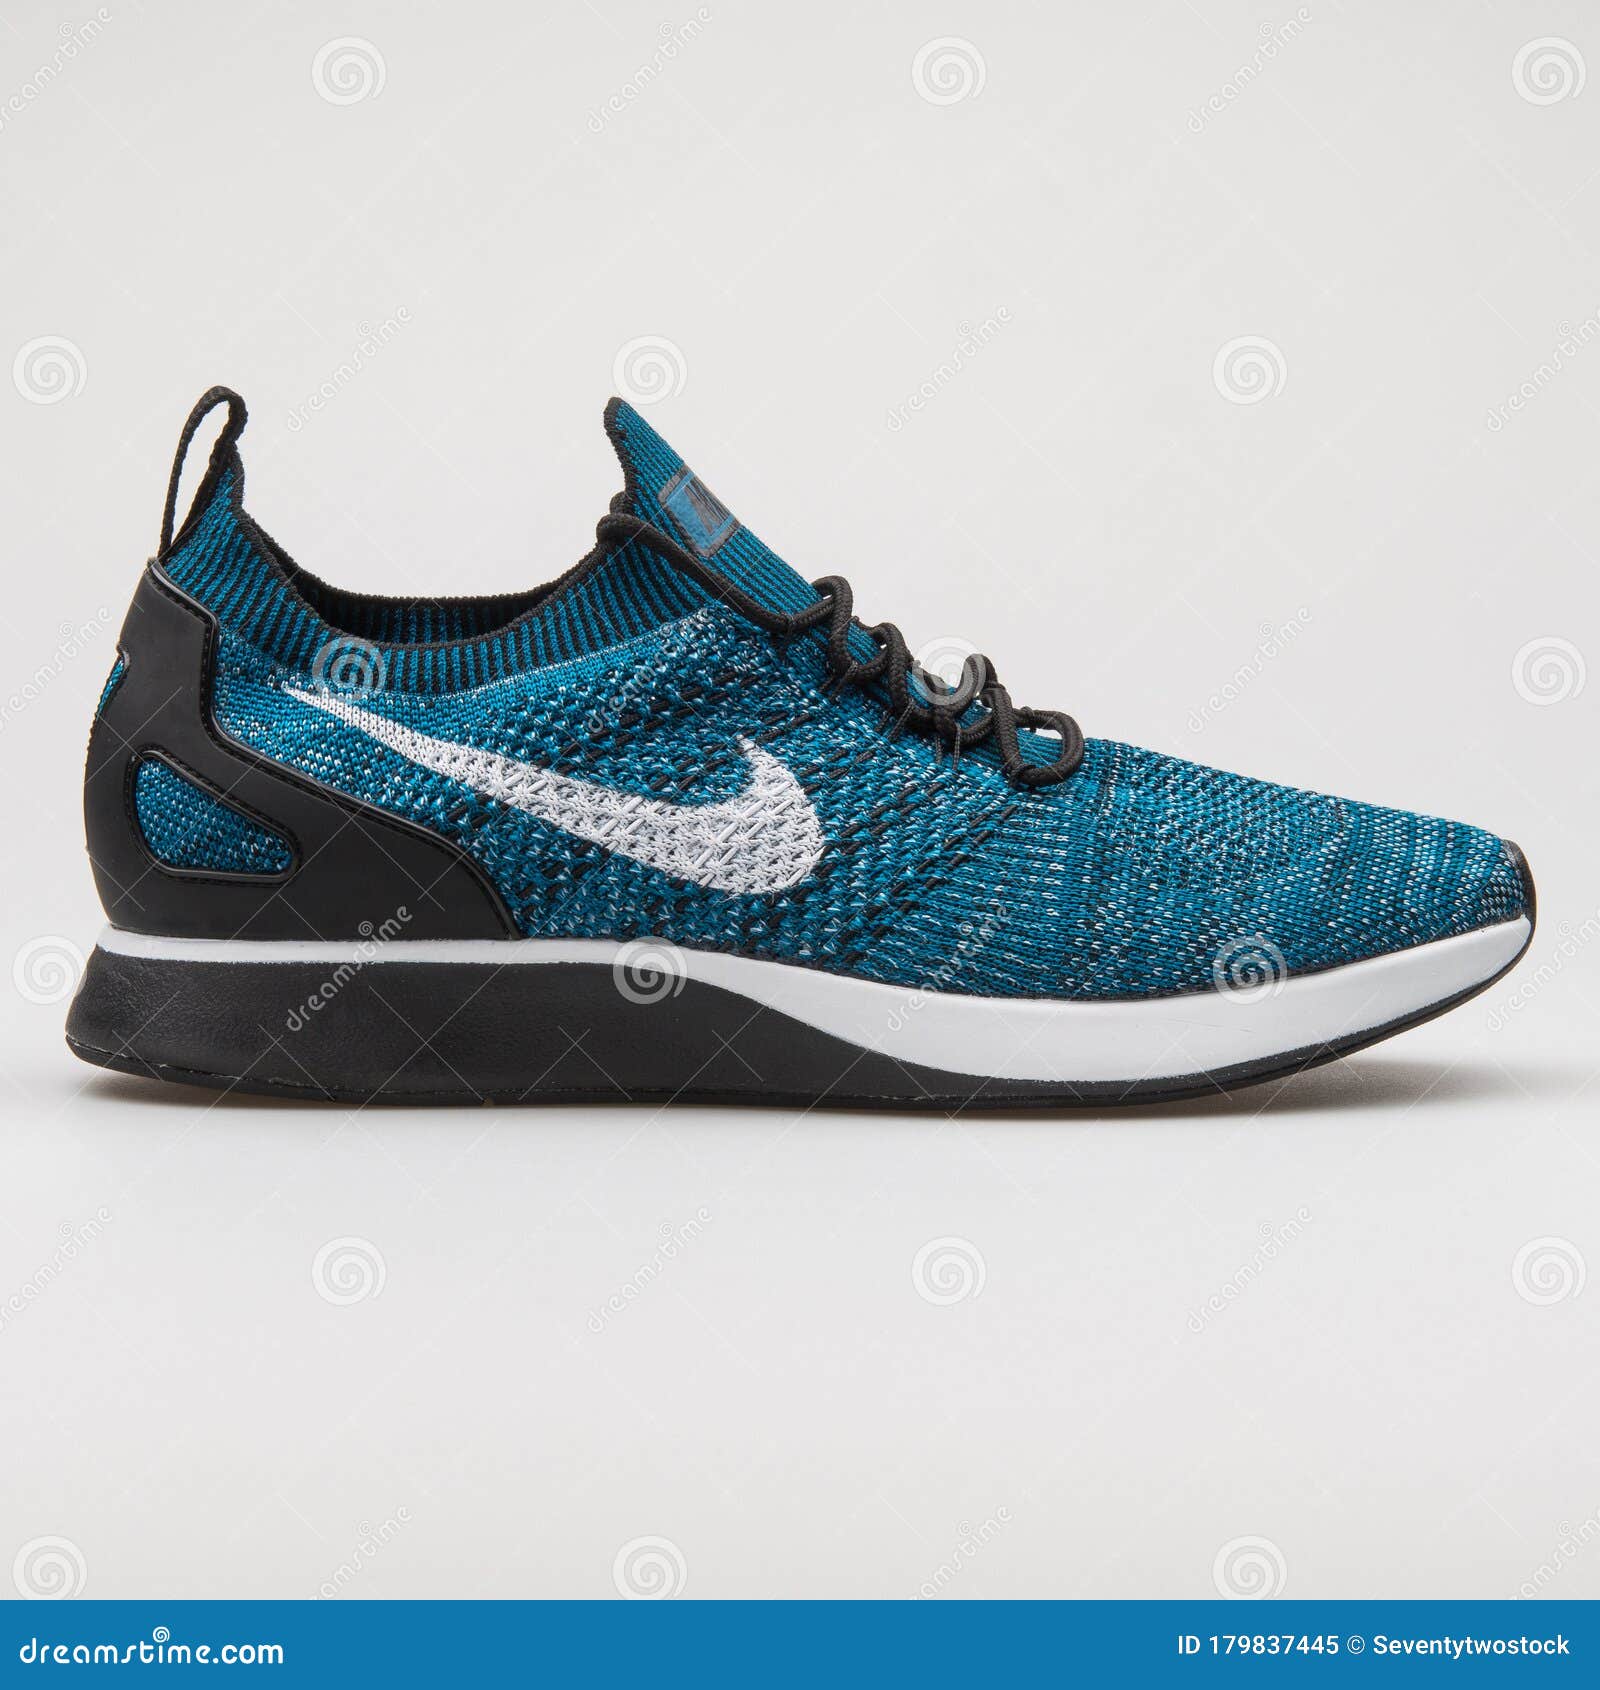 reform Specified federation Nike Air Zoom Mariah Flyknit Racer Blue, Black and White Sneaker Editorial  Image - Image of life, laces: 179837445